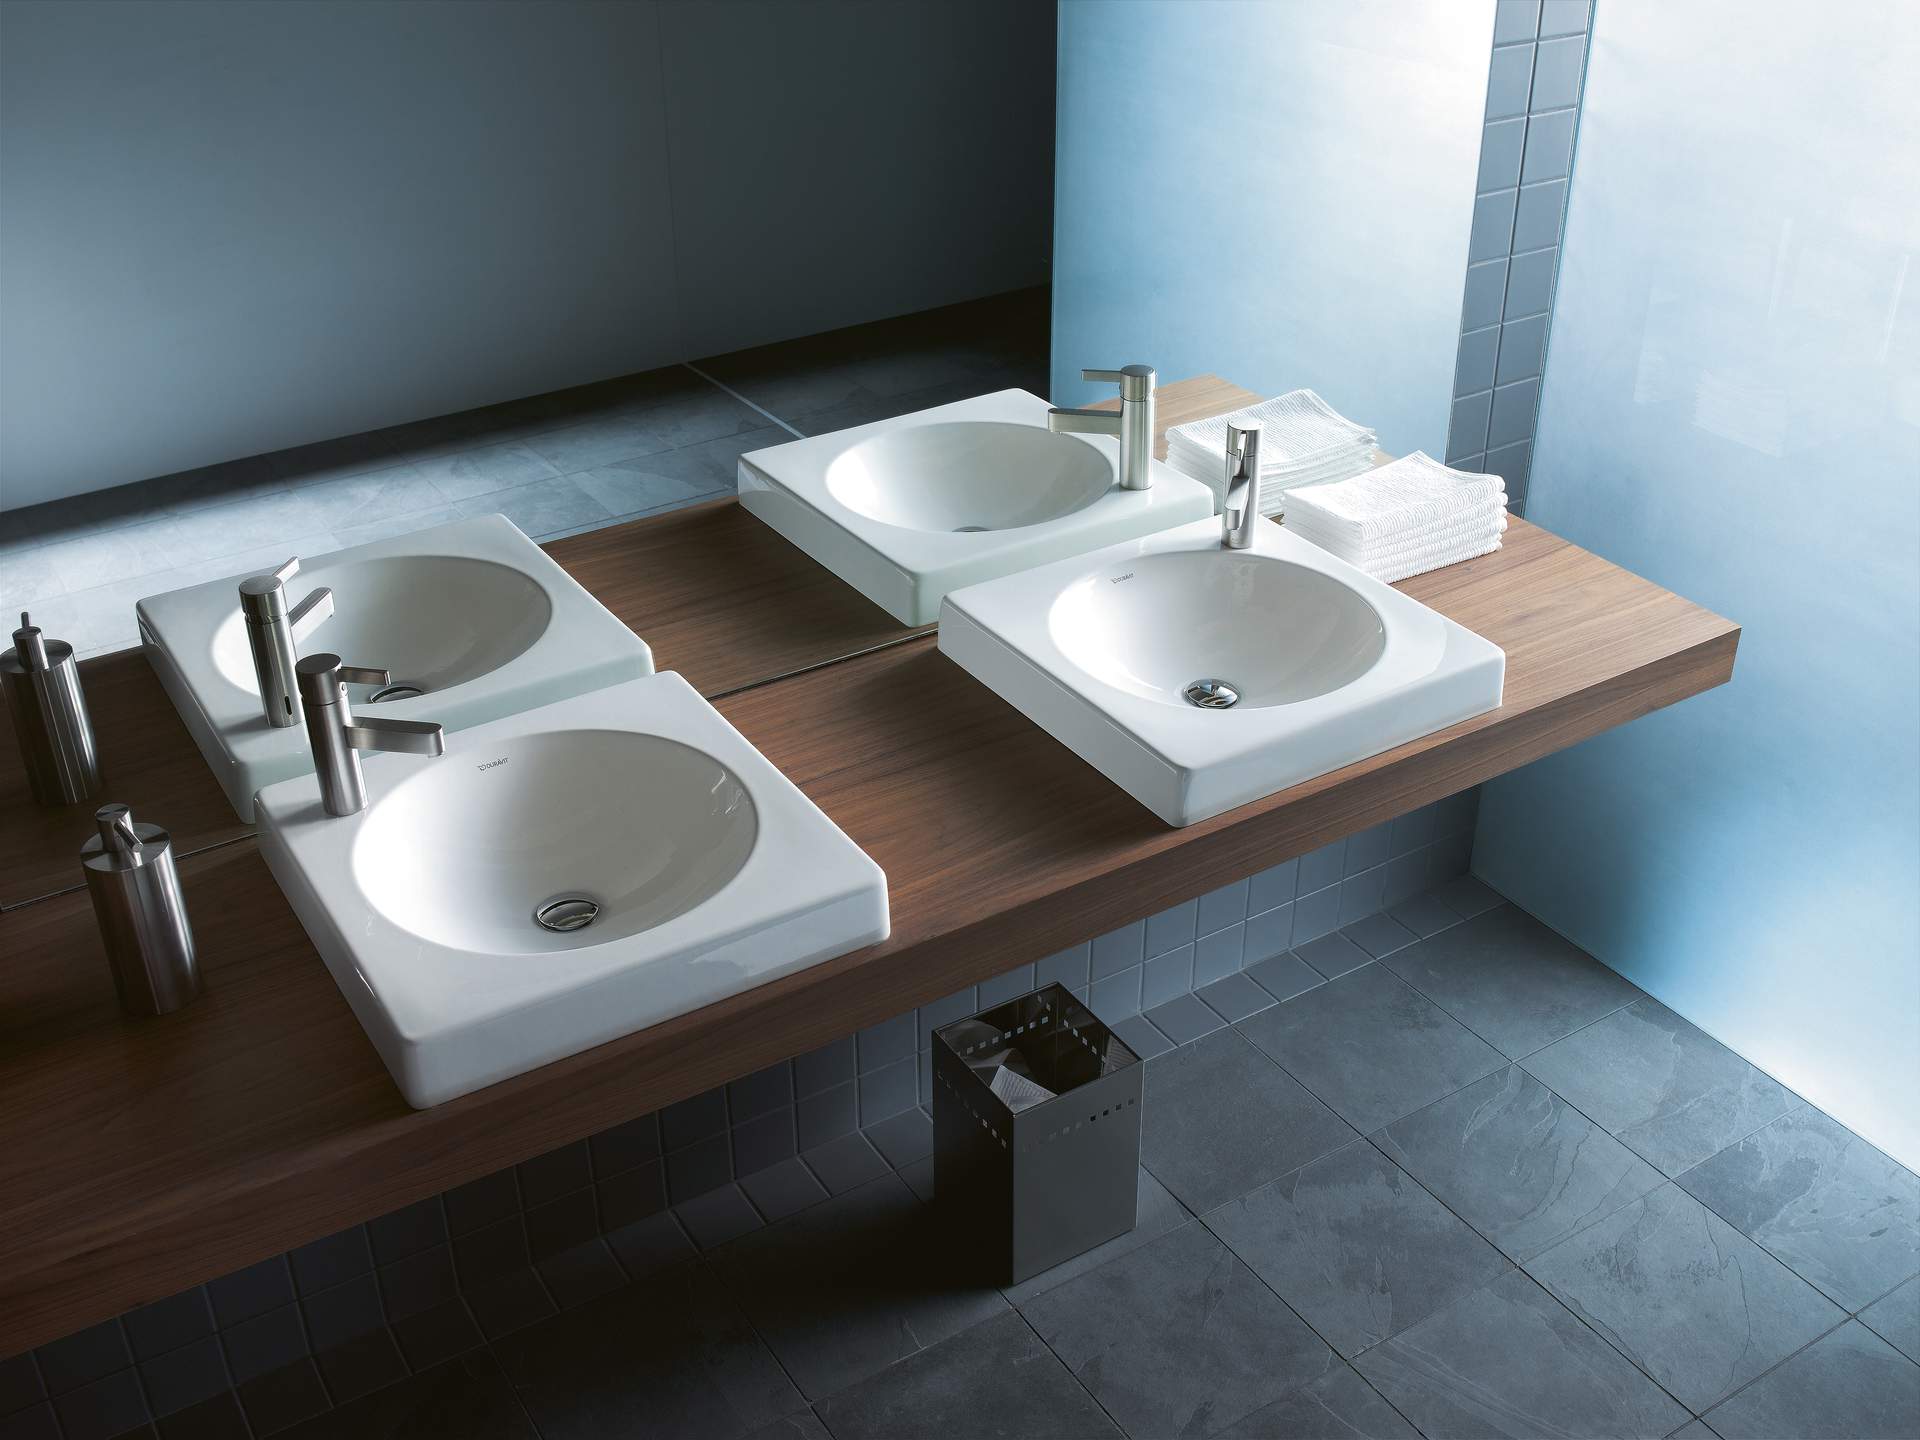 Barrier-free bathroom with height toilet
